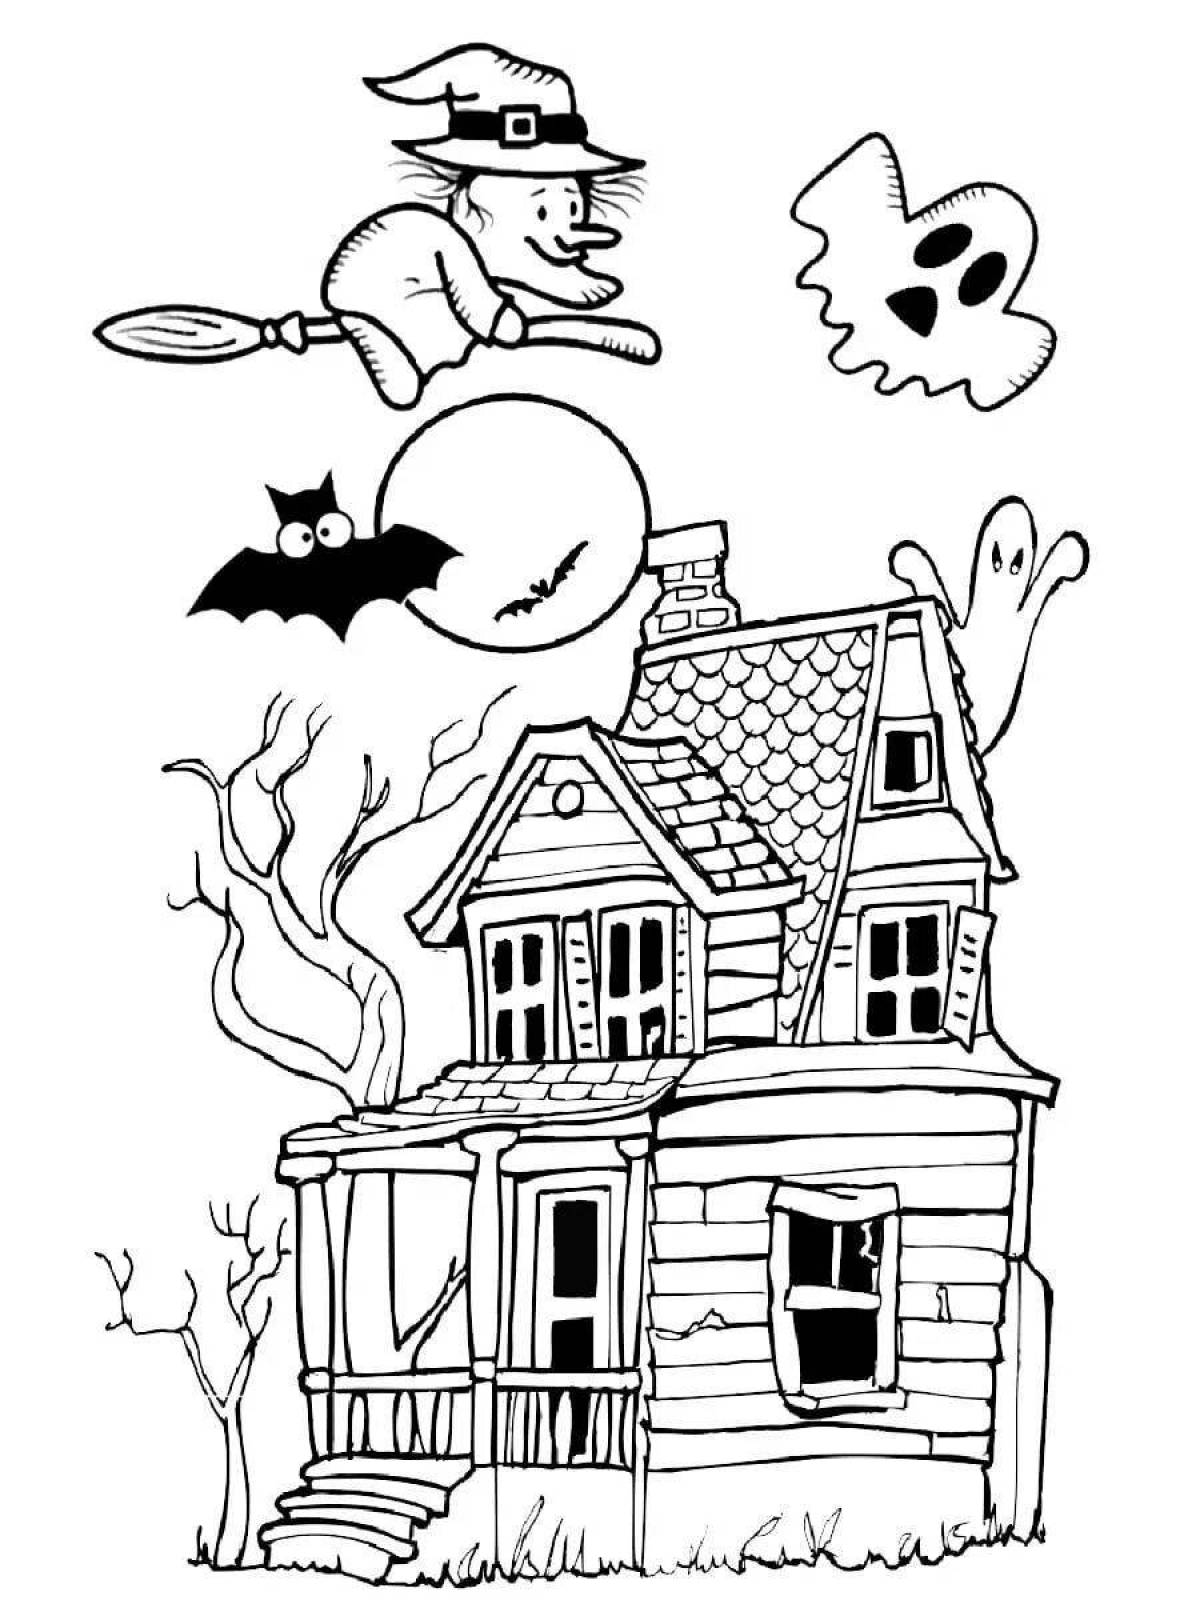 Halloween haunted house coloring page